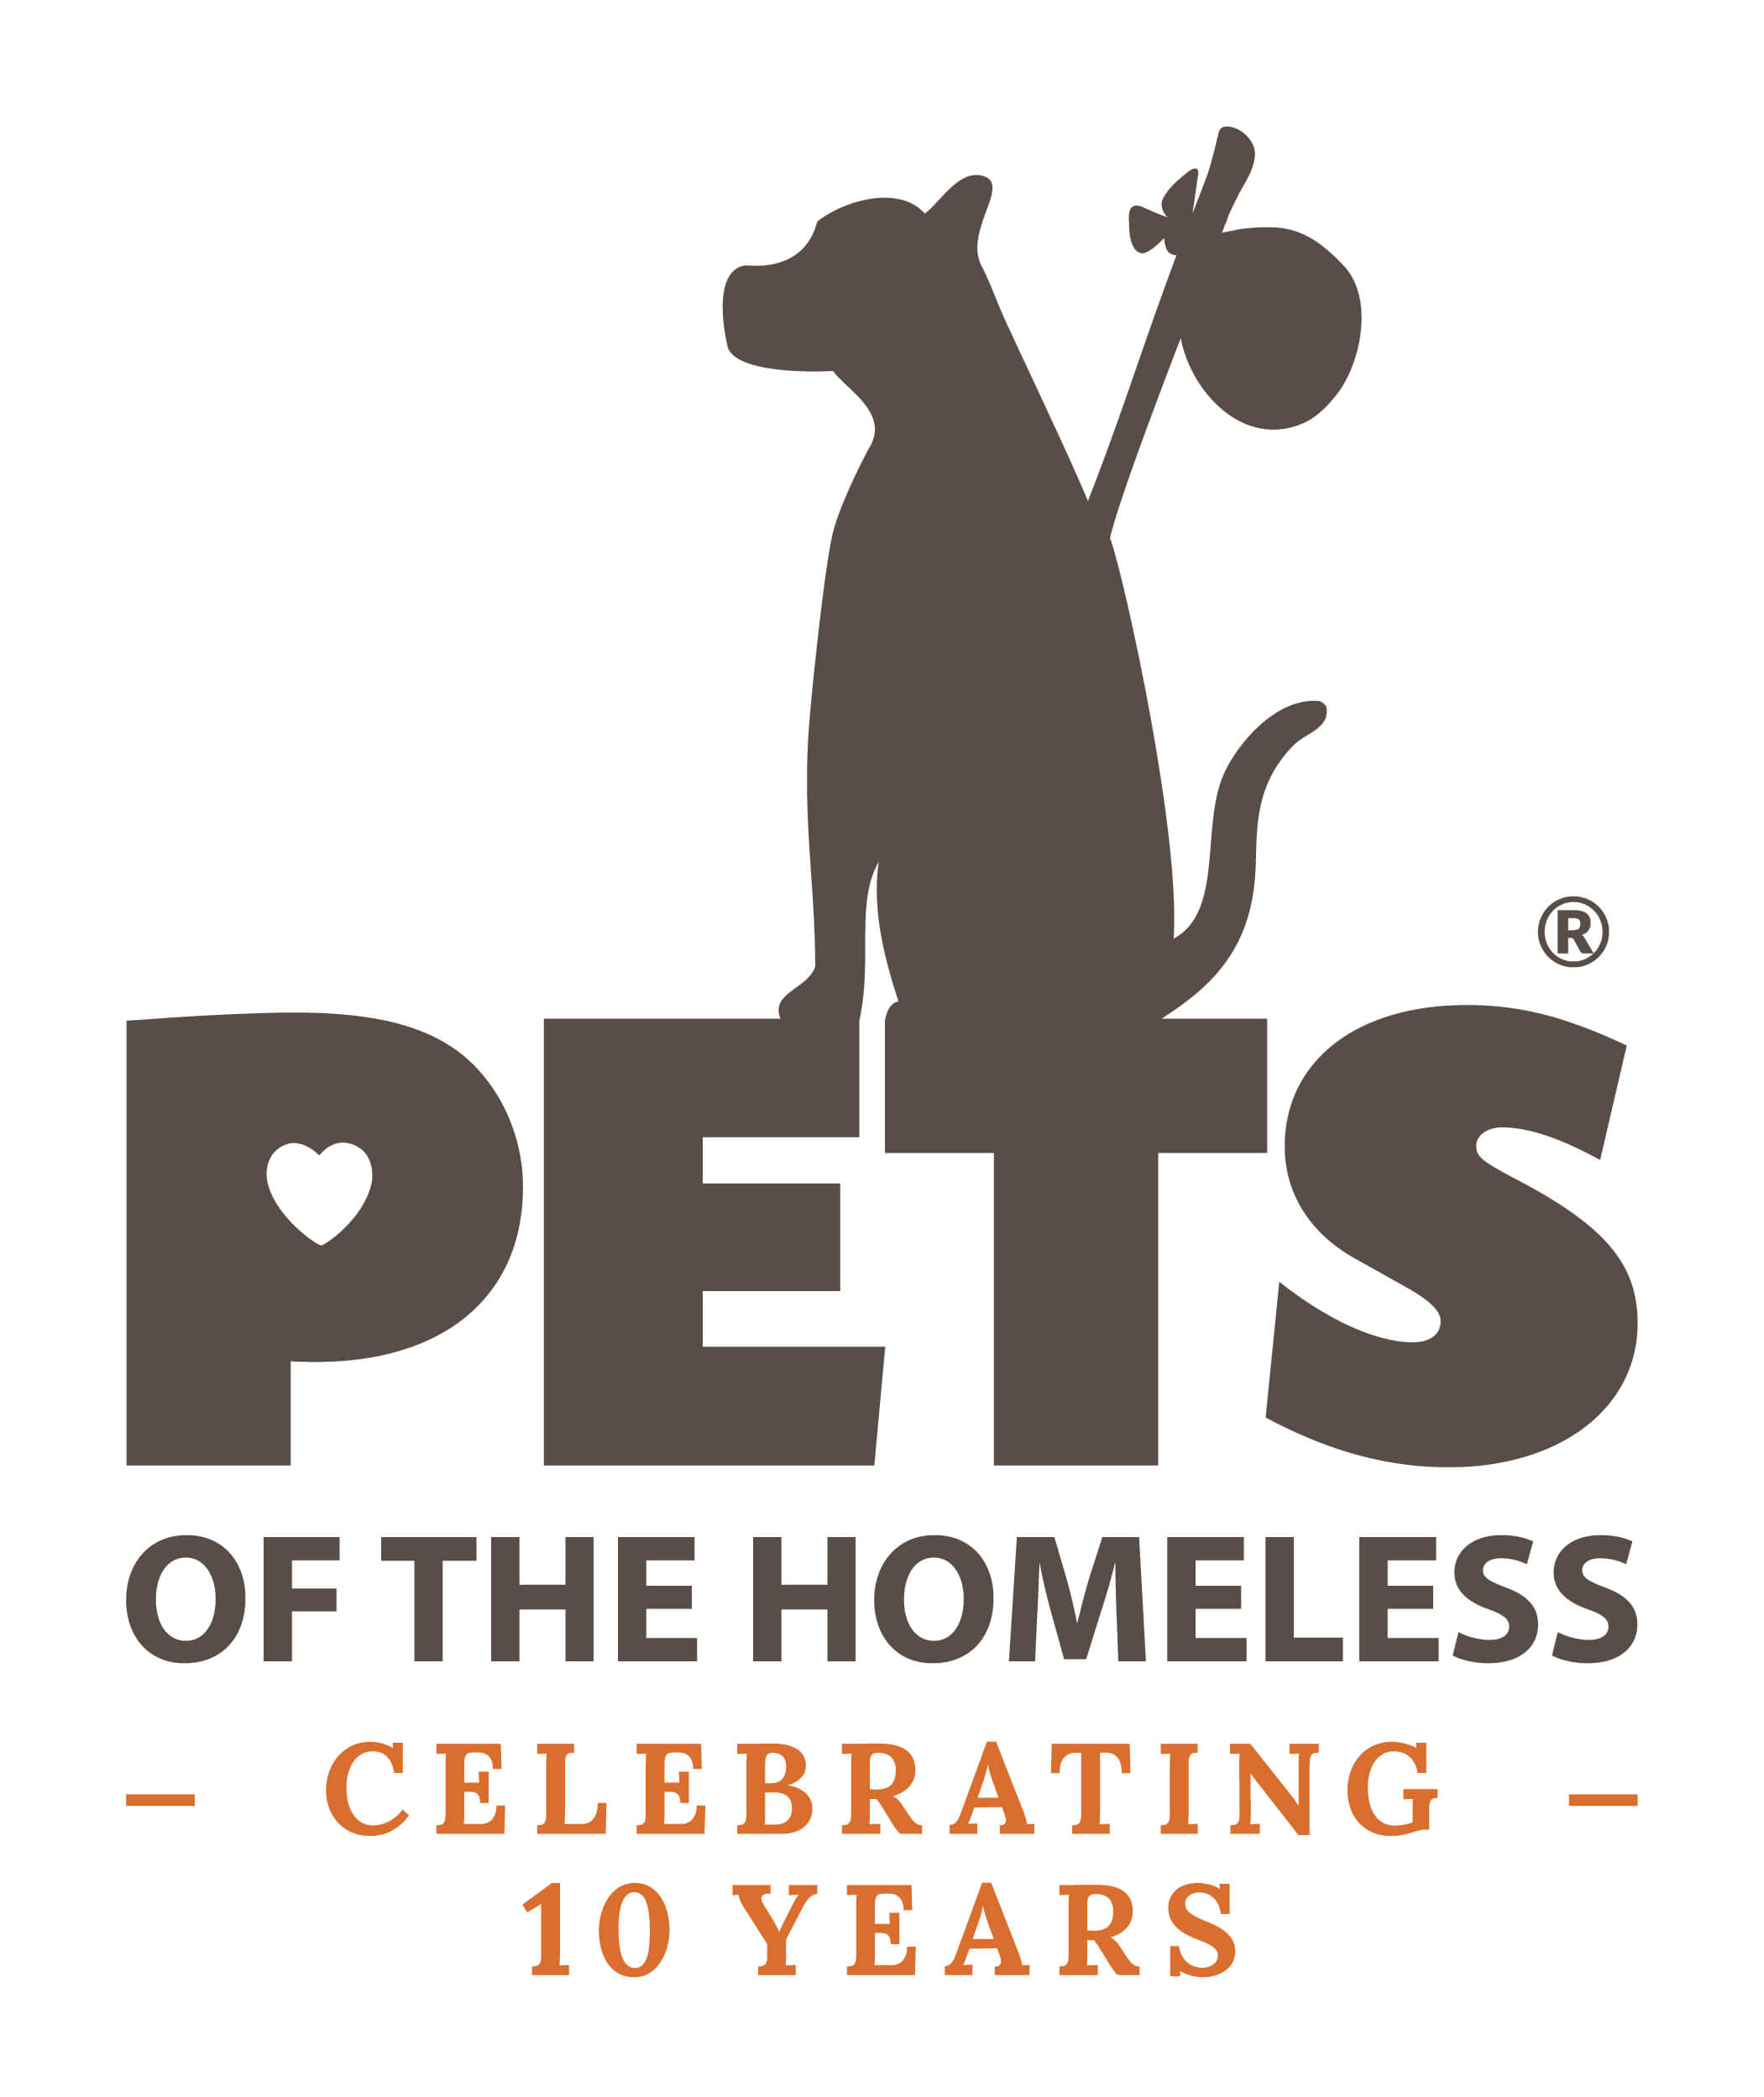 Homeless Logo - Pets of the Homeless Provides Free Collapsible Sleeping Crates for ...